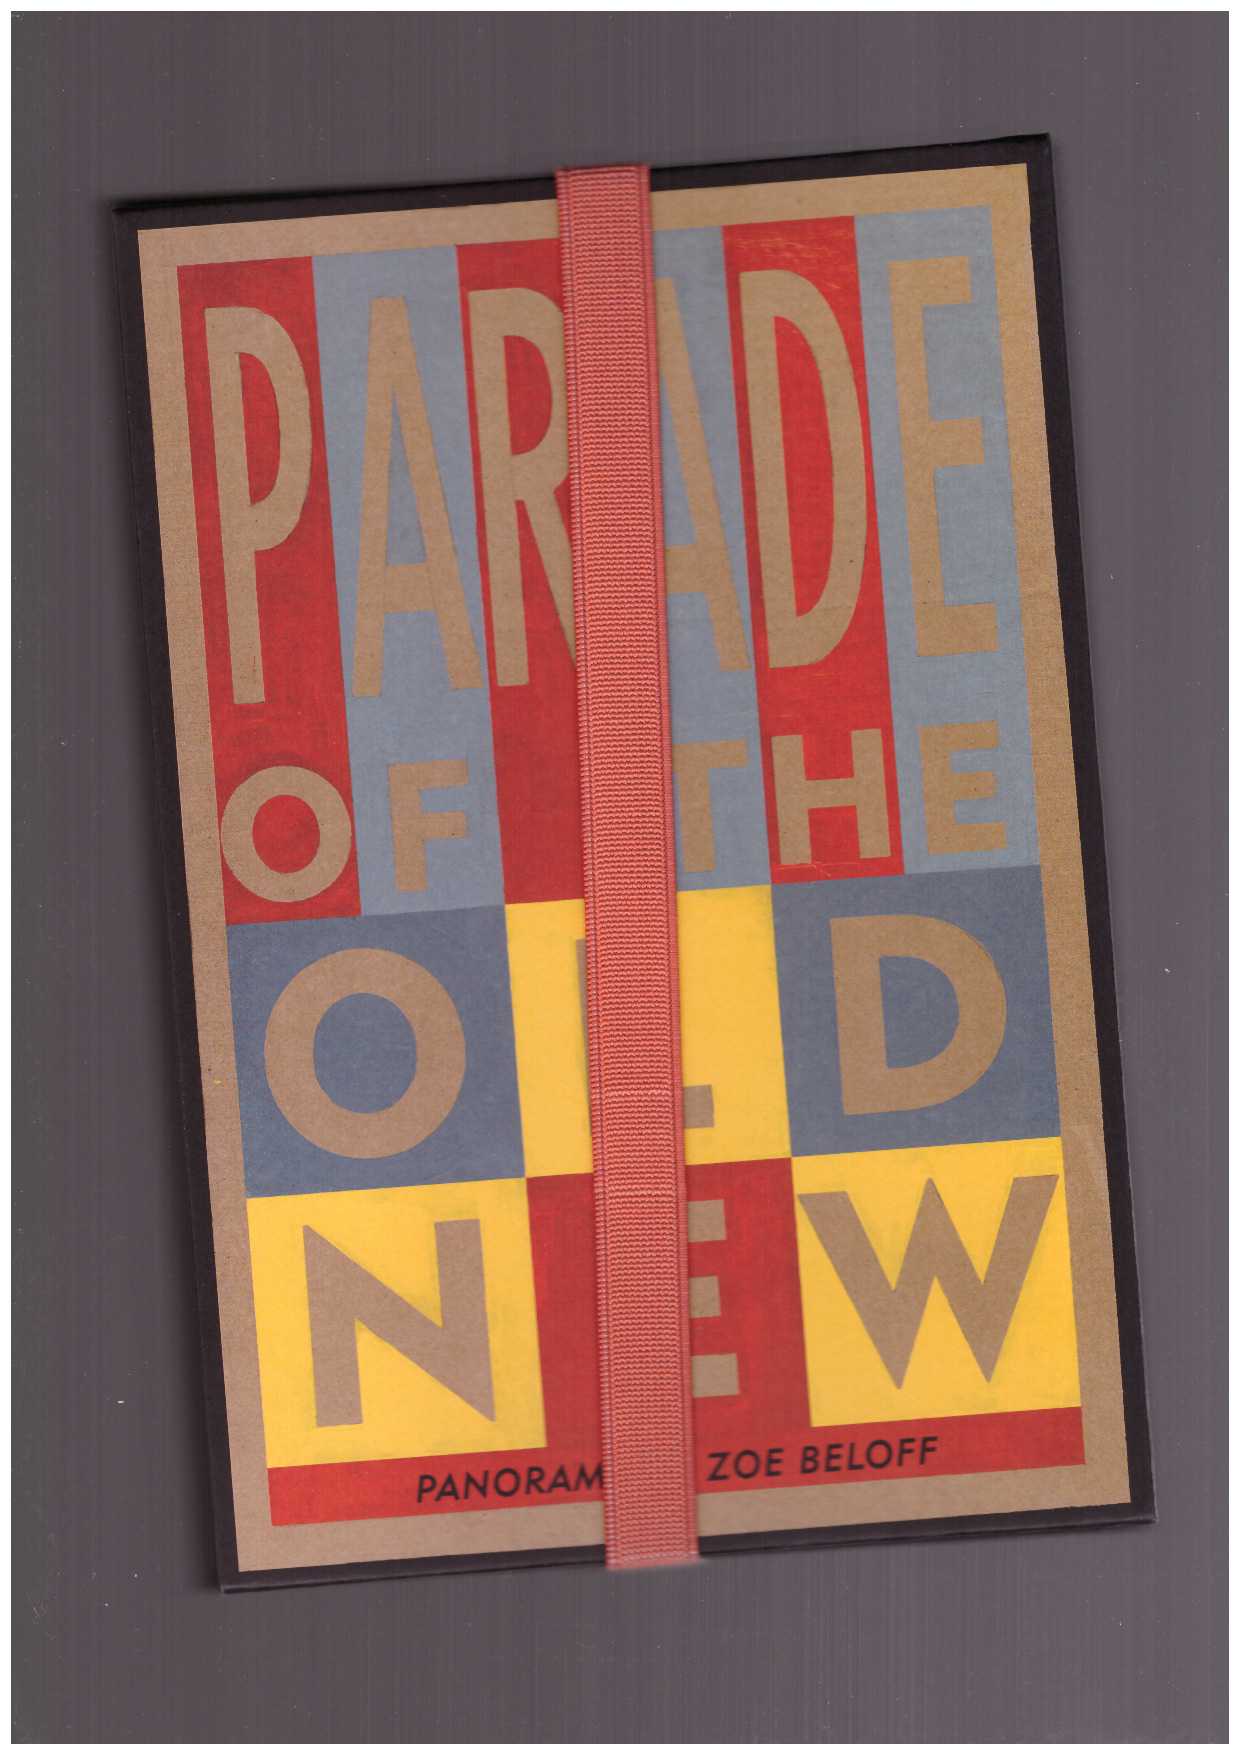 BELOFF, Zoe - Parade of the Old New